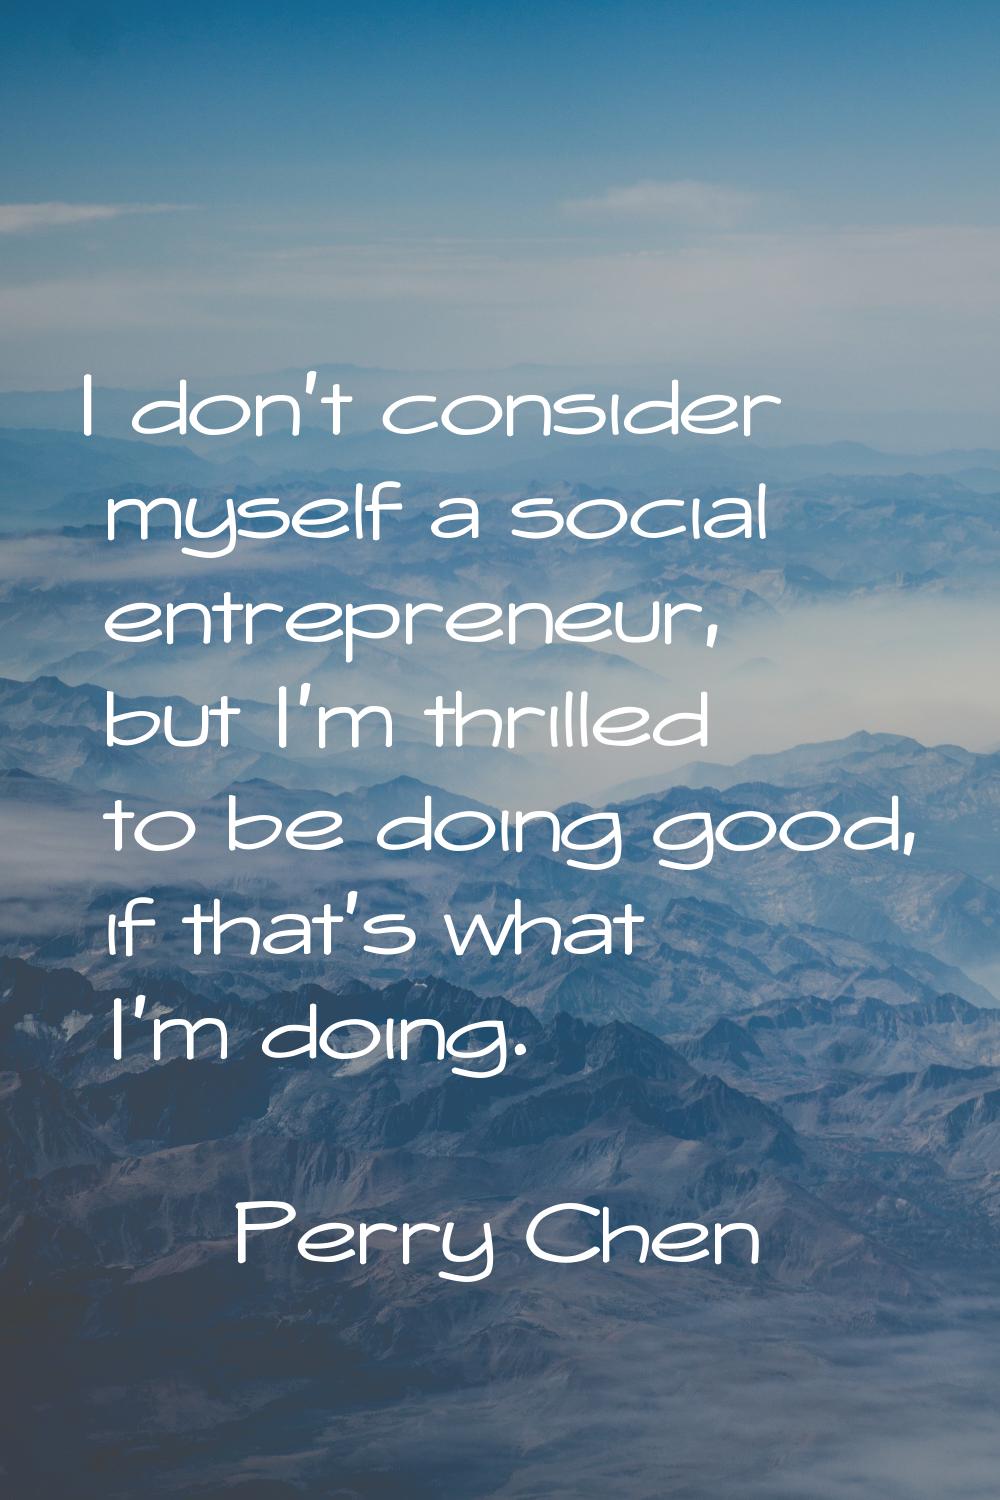 I don't consider myself a social entrepreneur, but I'm thrilled to be doing good, if that's what I'